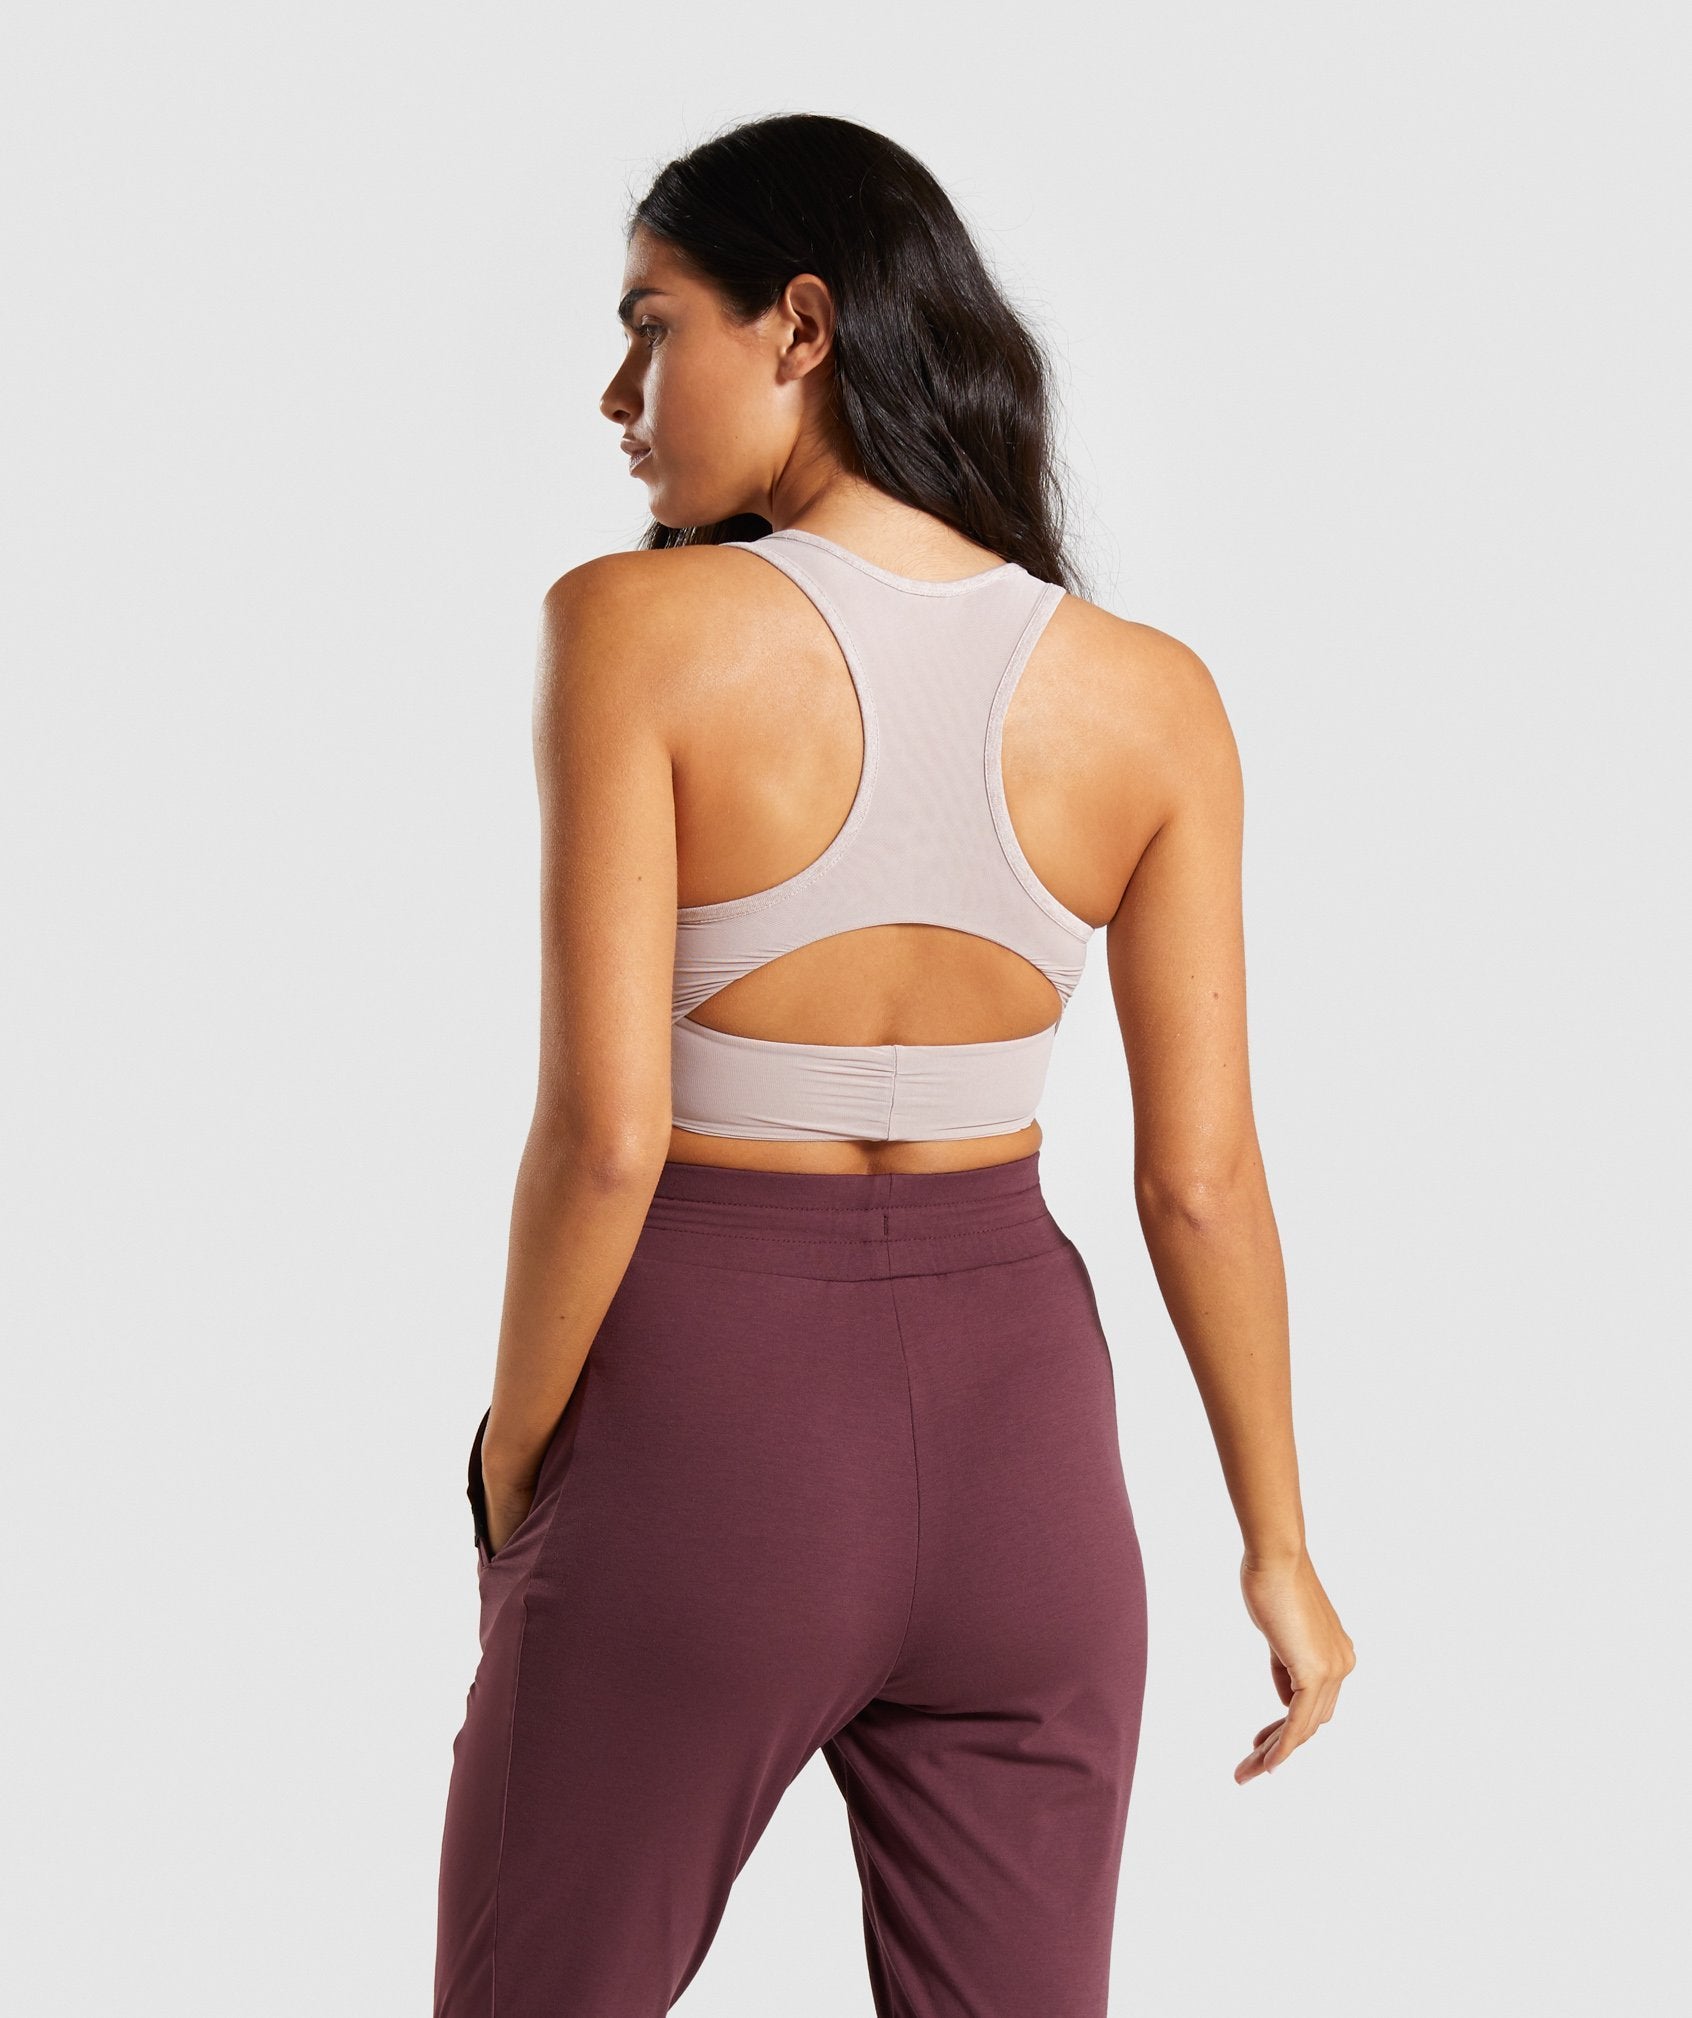 Aura Sports Bra in Taupe - view 2